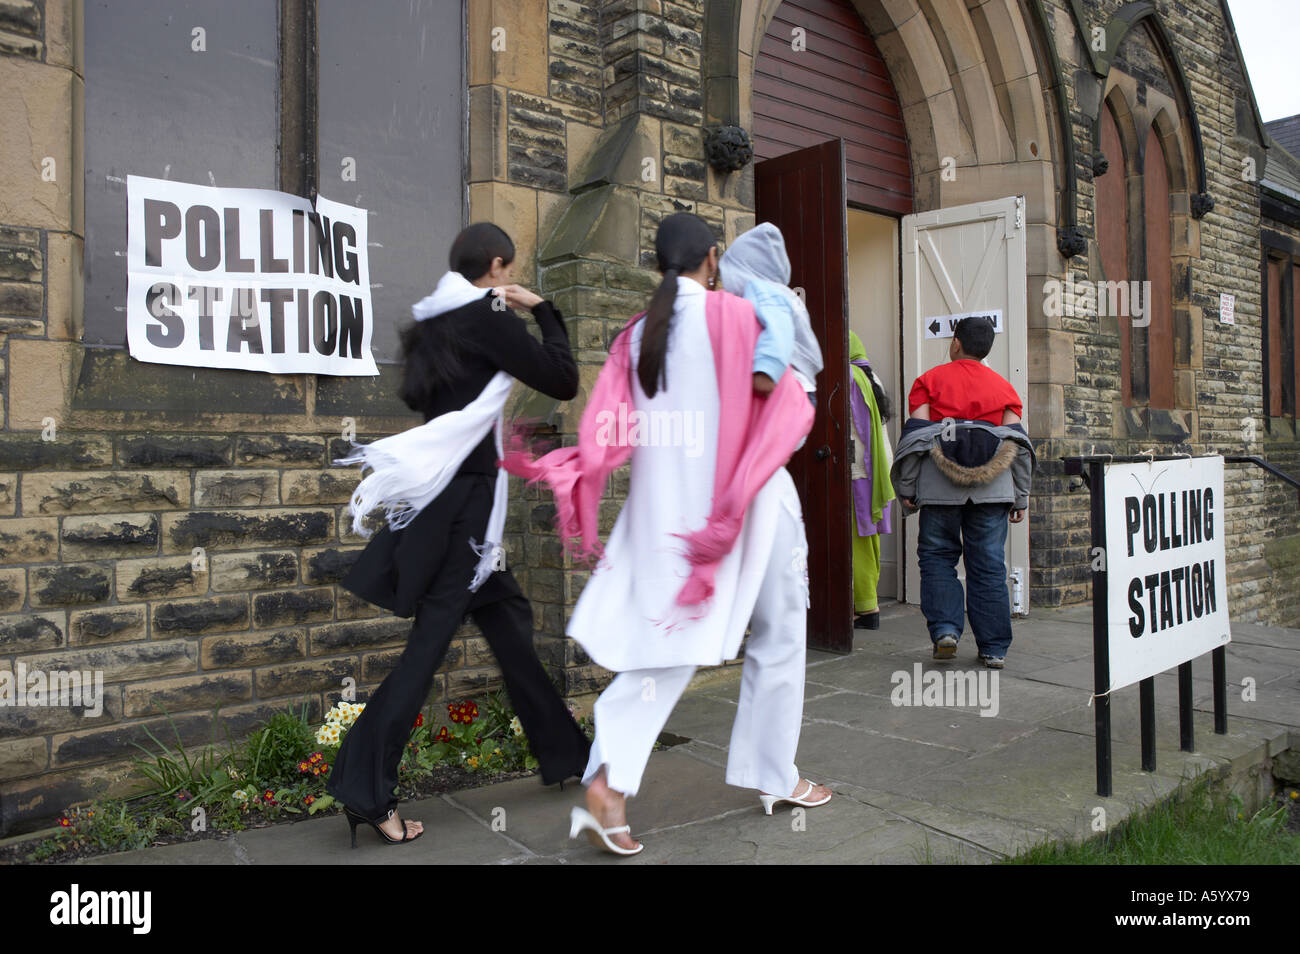 BRITISH ASIAN MUSLIMS ENTERING POLLING STATION TO VOTE IN ELECTION Stock Photo